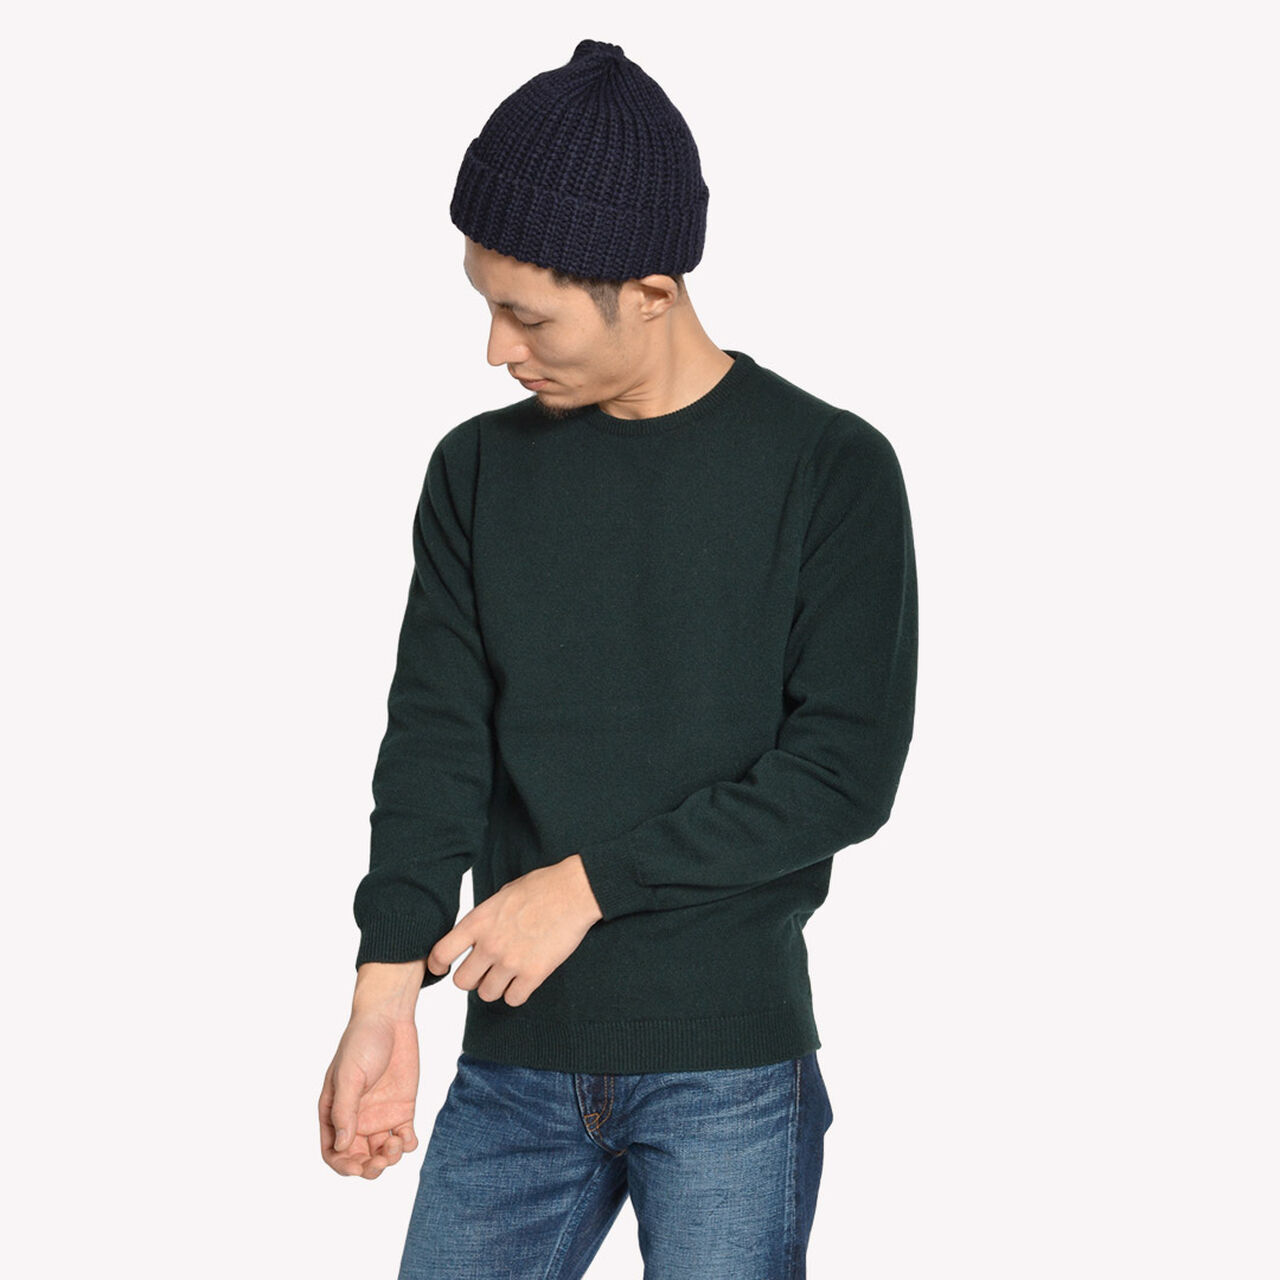 Lambswool crew neck knit,BlackBamboo, large image number 0